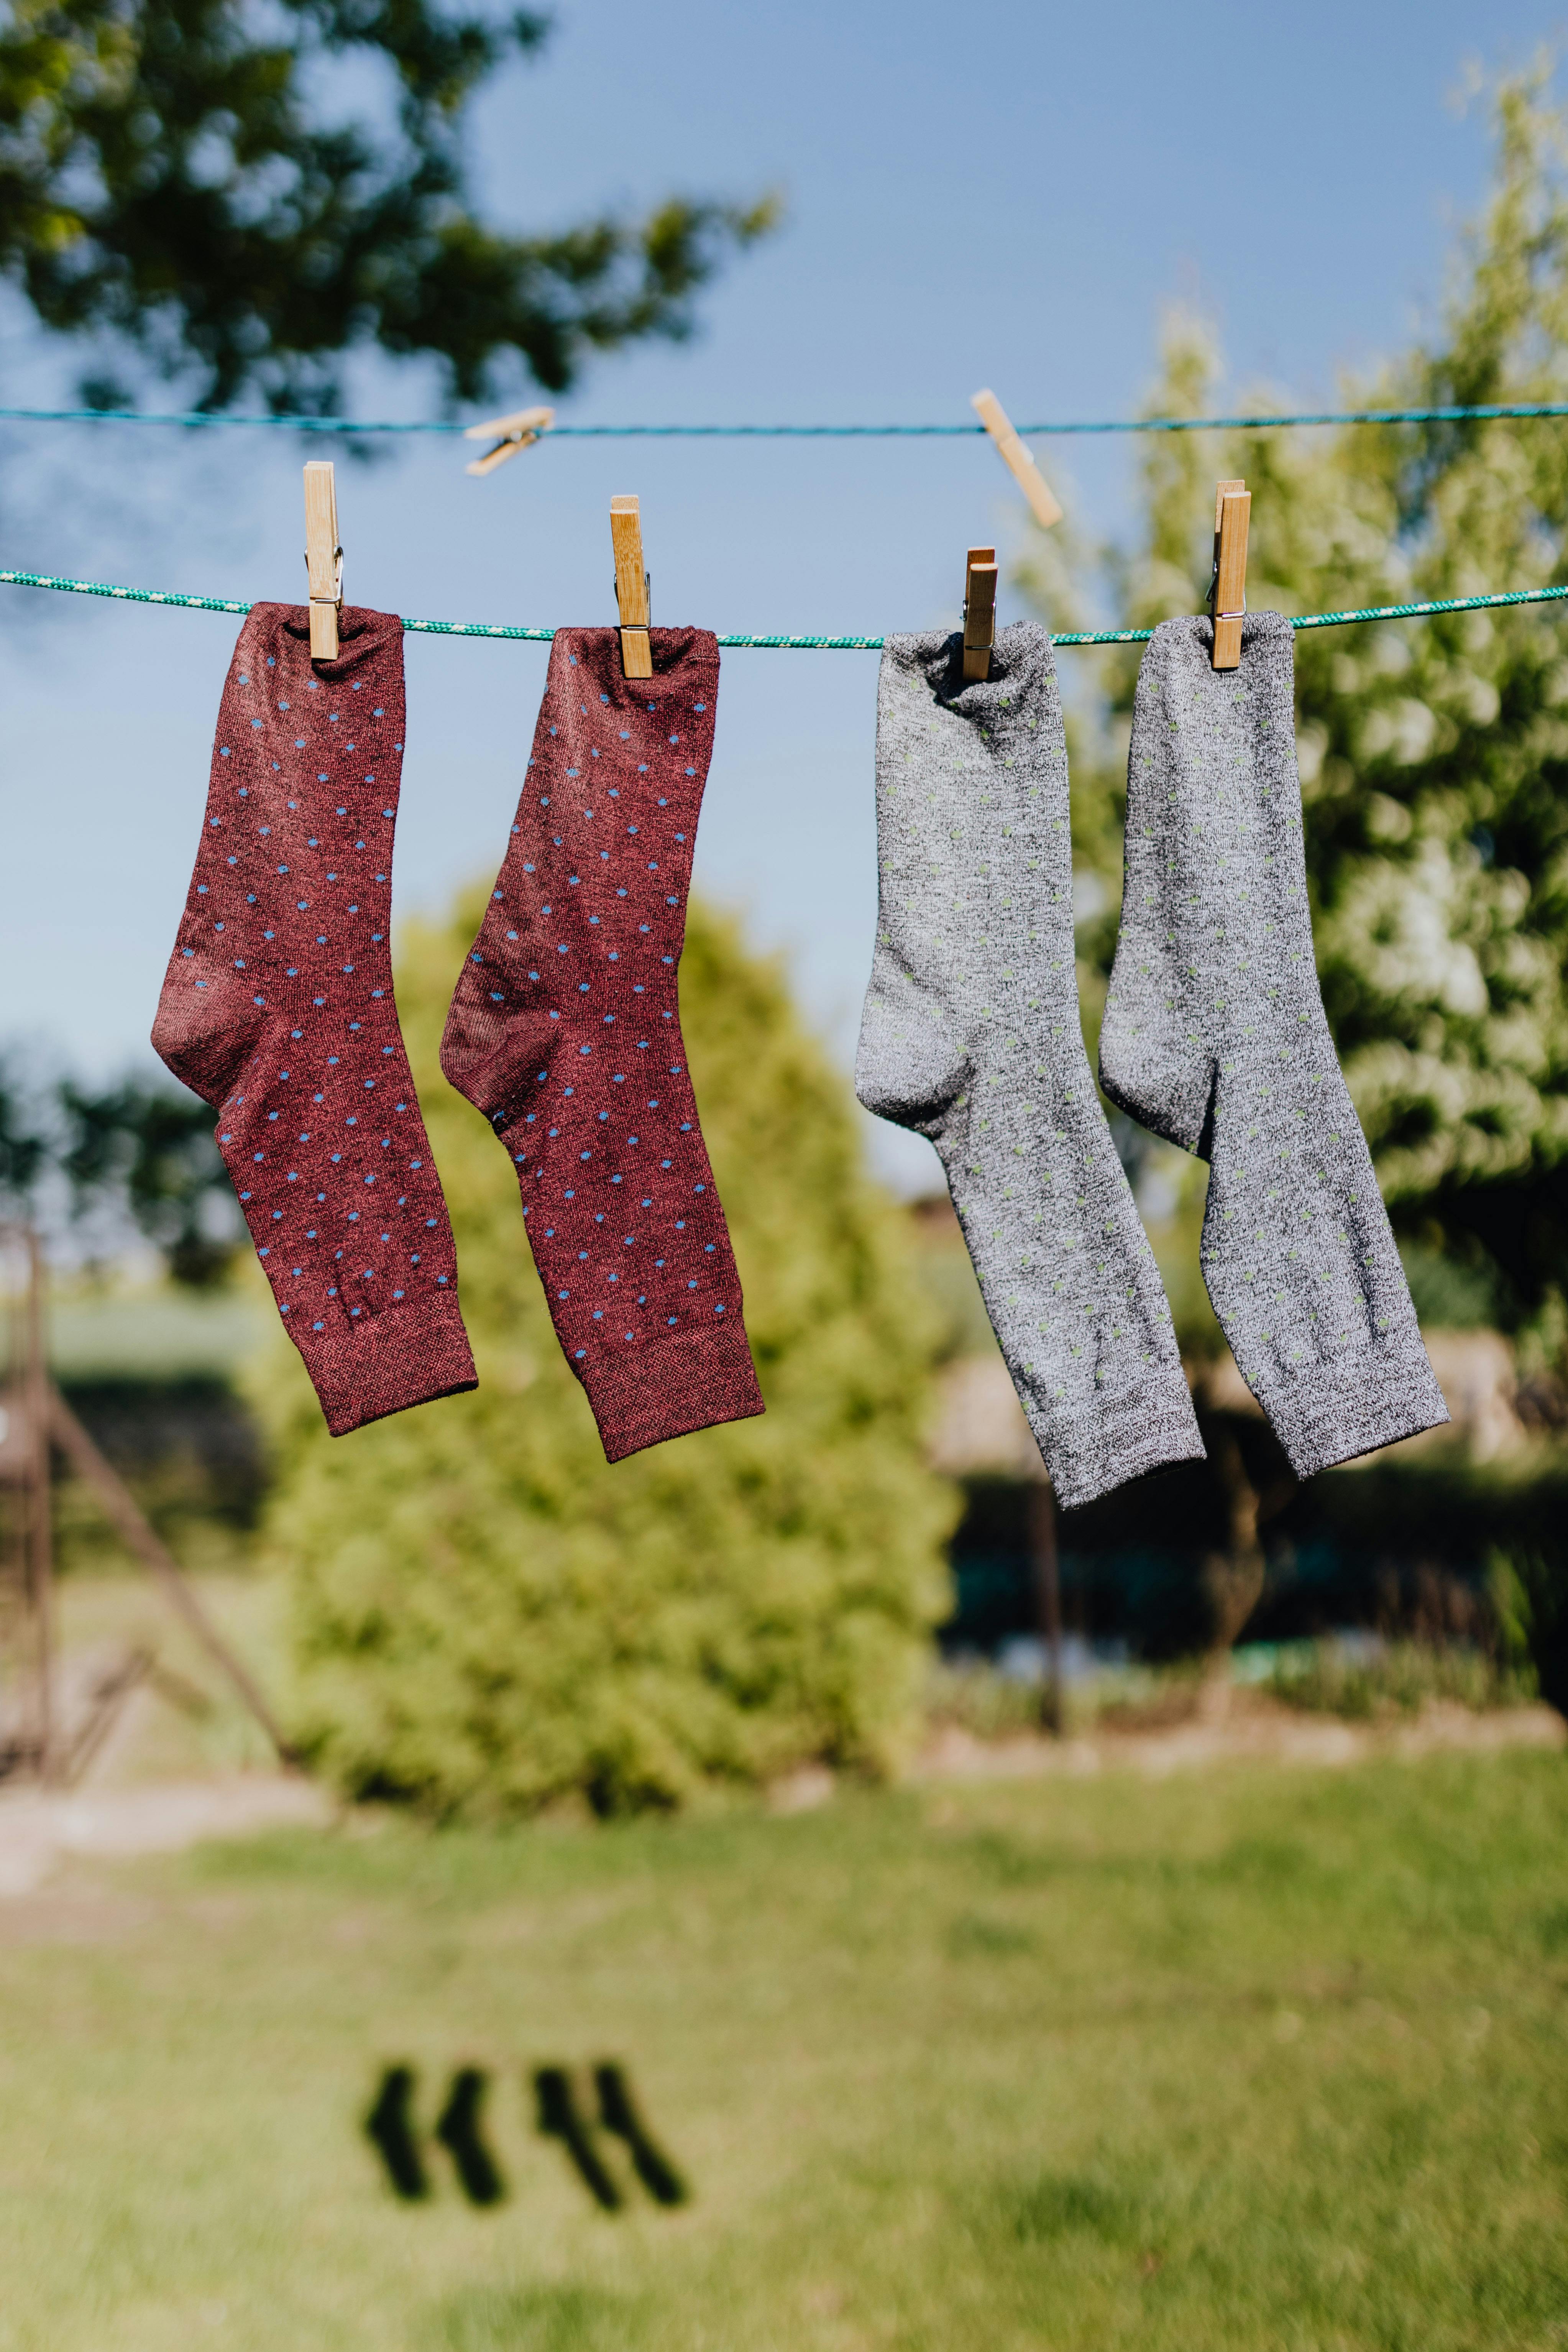 Multicolored socks drying on rope with clothespins in garden · Free Stock  Photo